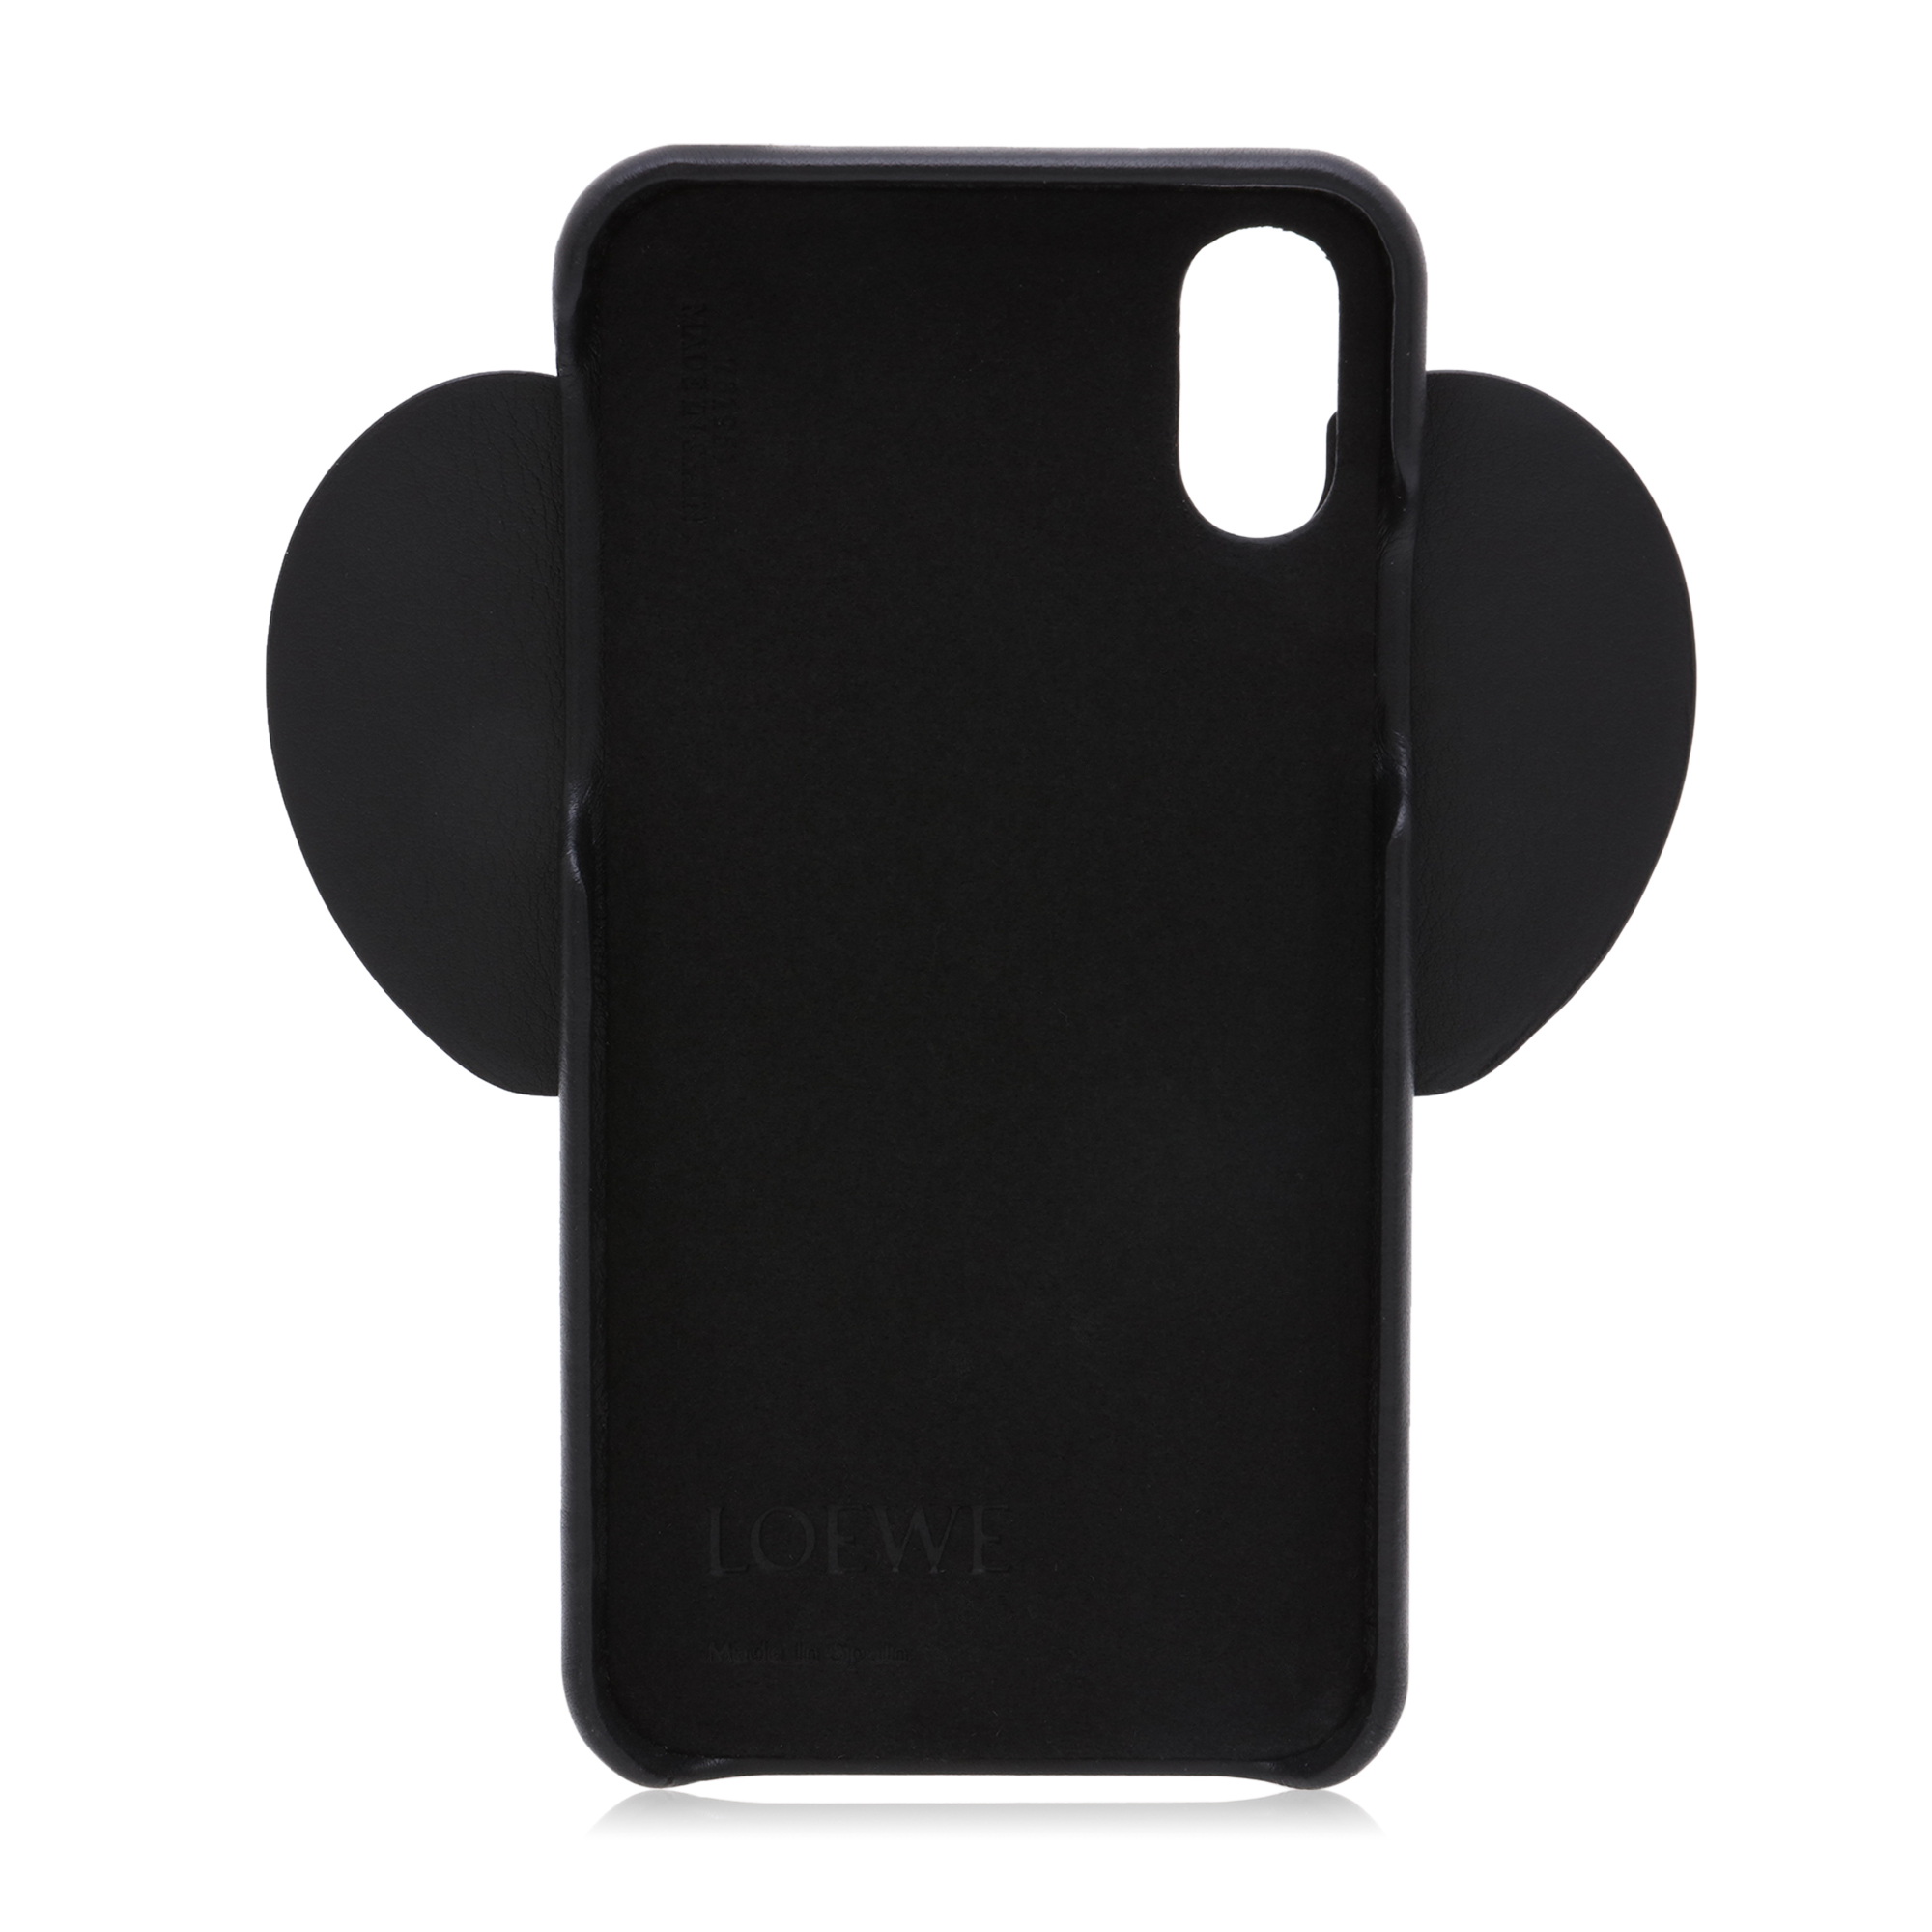 Loewe Elephant Cover For Iphone X/Xs for Men - Black in UAE